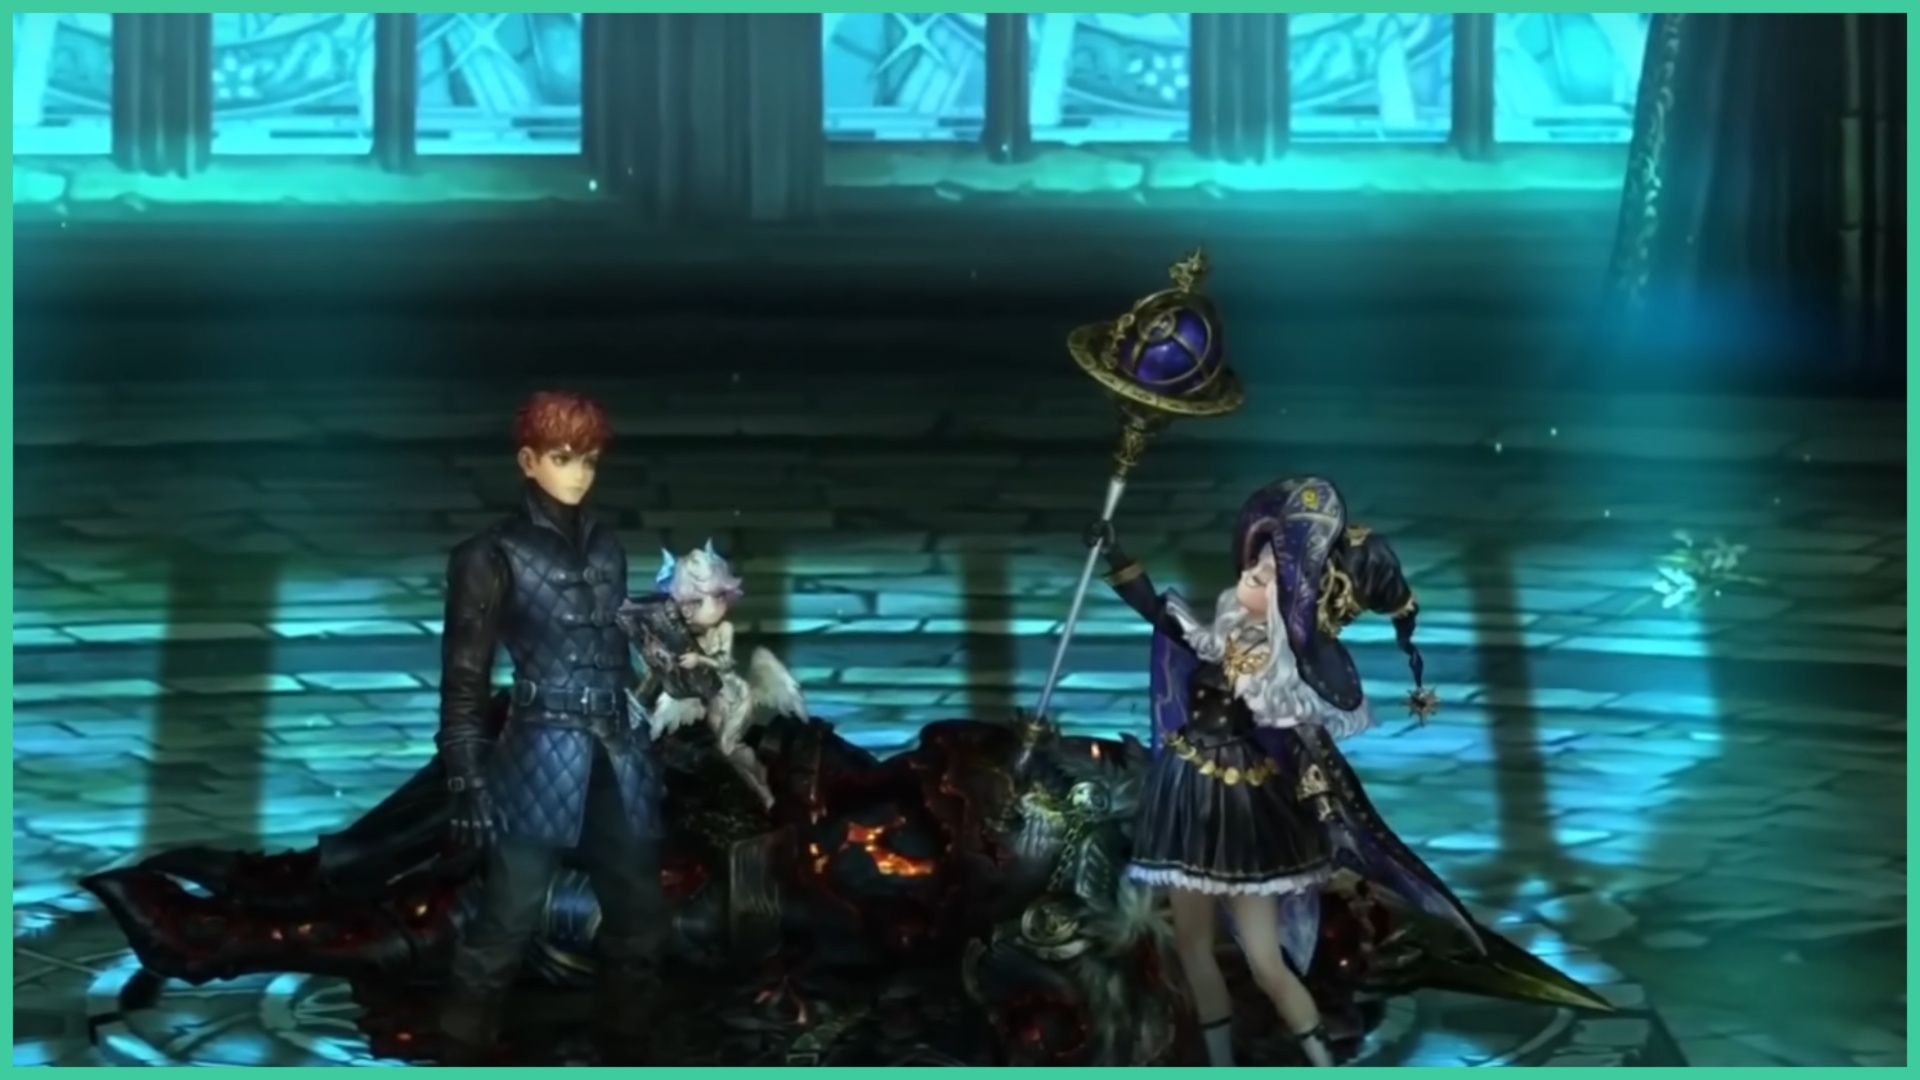 feature image for our astra knights of veda characters guide, the image is a screenshot from the game's trailer of xanthia the mage lifting her staff up as a male character stands to the left with a floating fairy holding a book, there is a defeated monster on the ground as specs of light float around the room and blue lights pours through the large windows